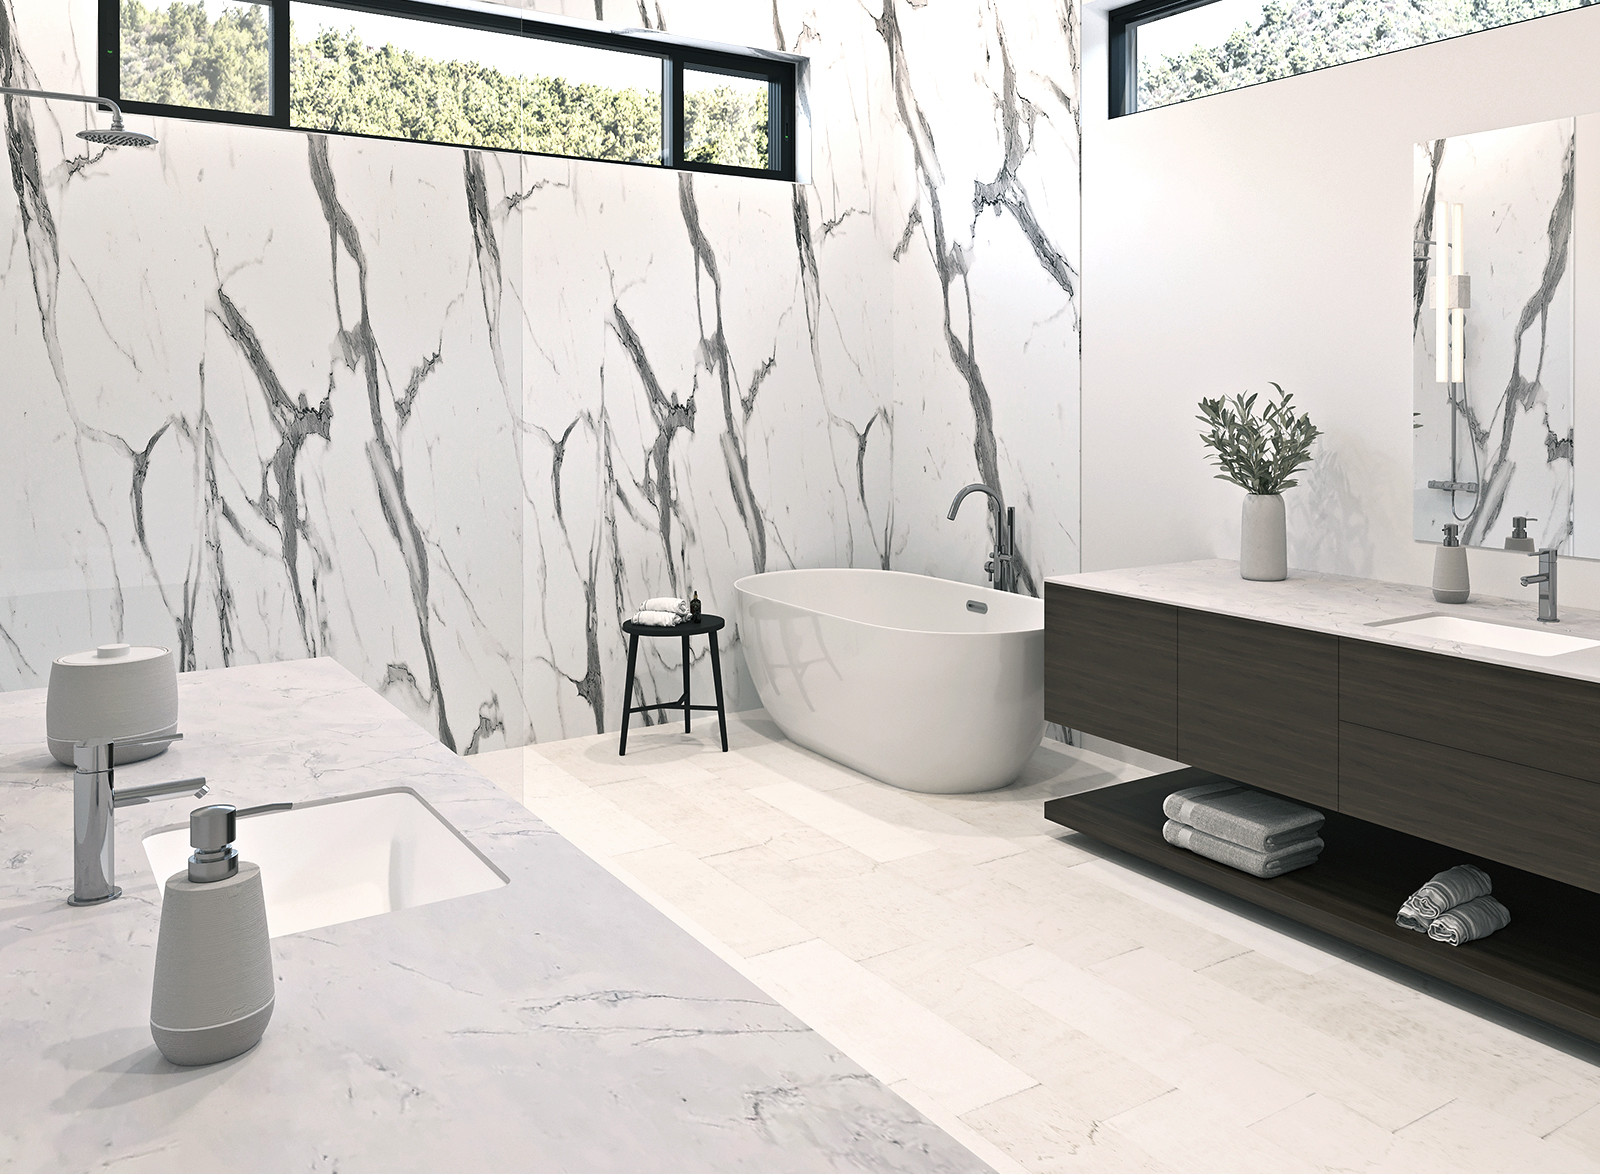 Bathroom Wall Panels Buying Guide, How To Choose Bathroom Wall Panels, Shower Panels - Bathrooms, Shower Room Panels, Wet Wall Panels, Bathroom  Panels, Splash Panels